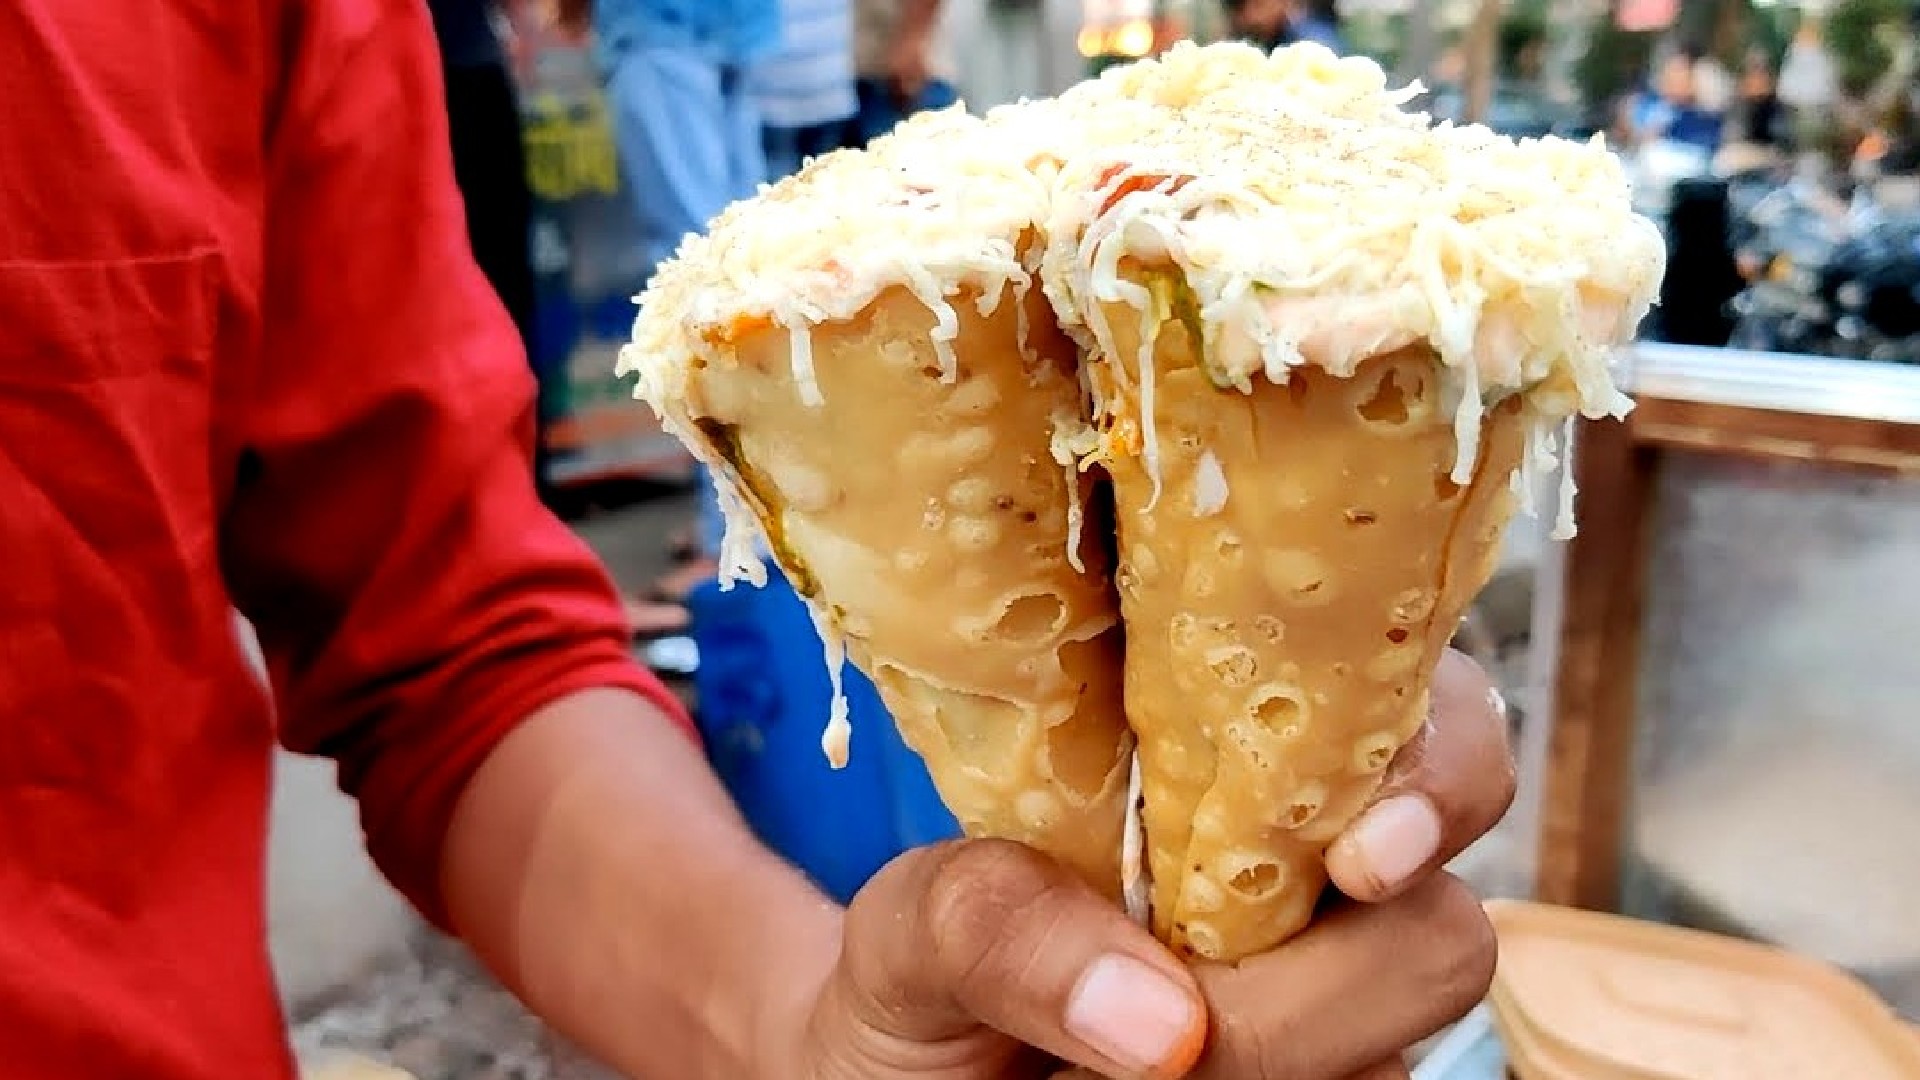 This Small Cart In Surat Offers A Funky Cheese Cone Chaat With Tangy Chutneys To Smack Your Lips